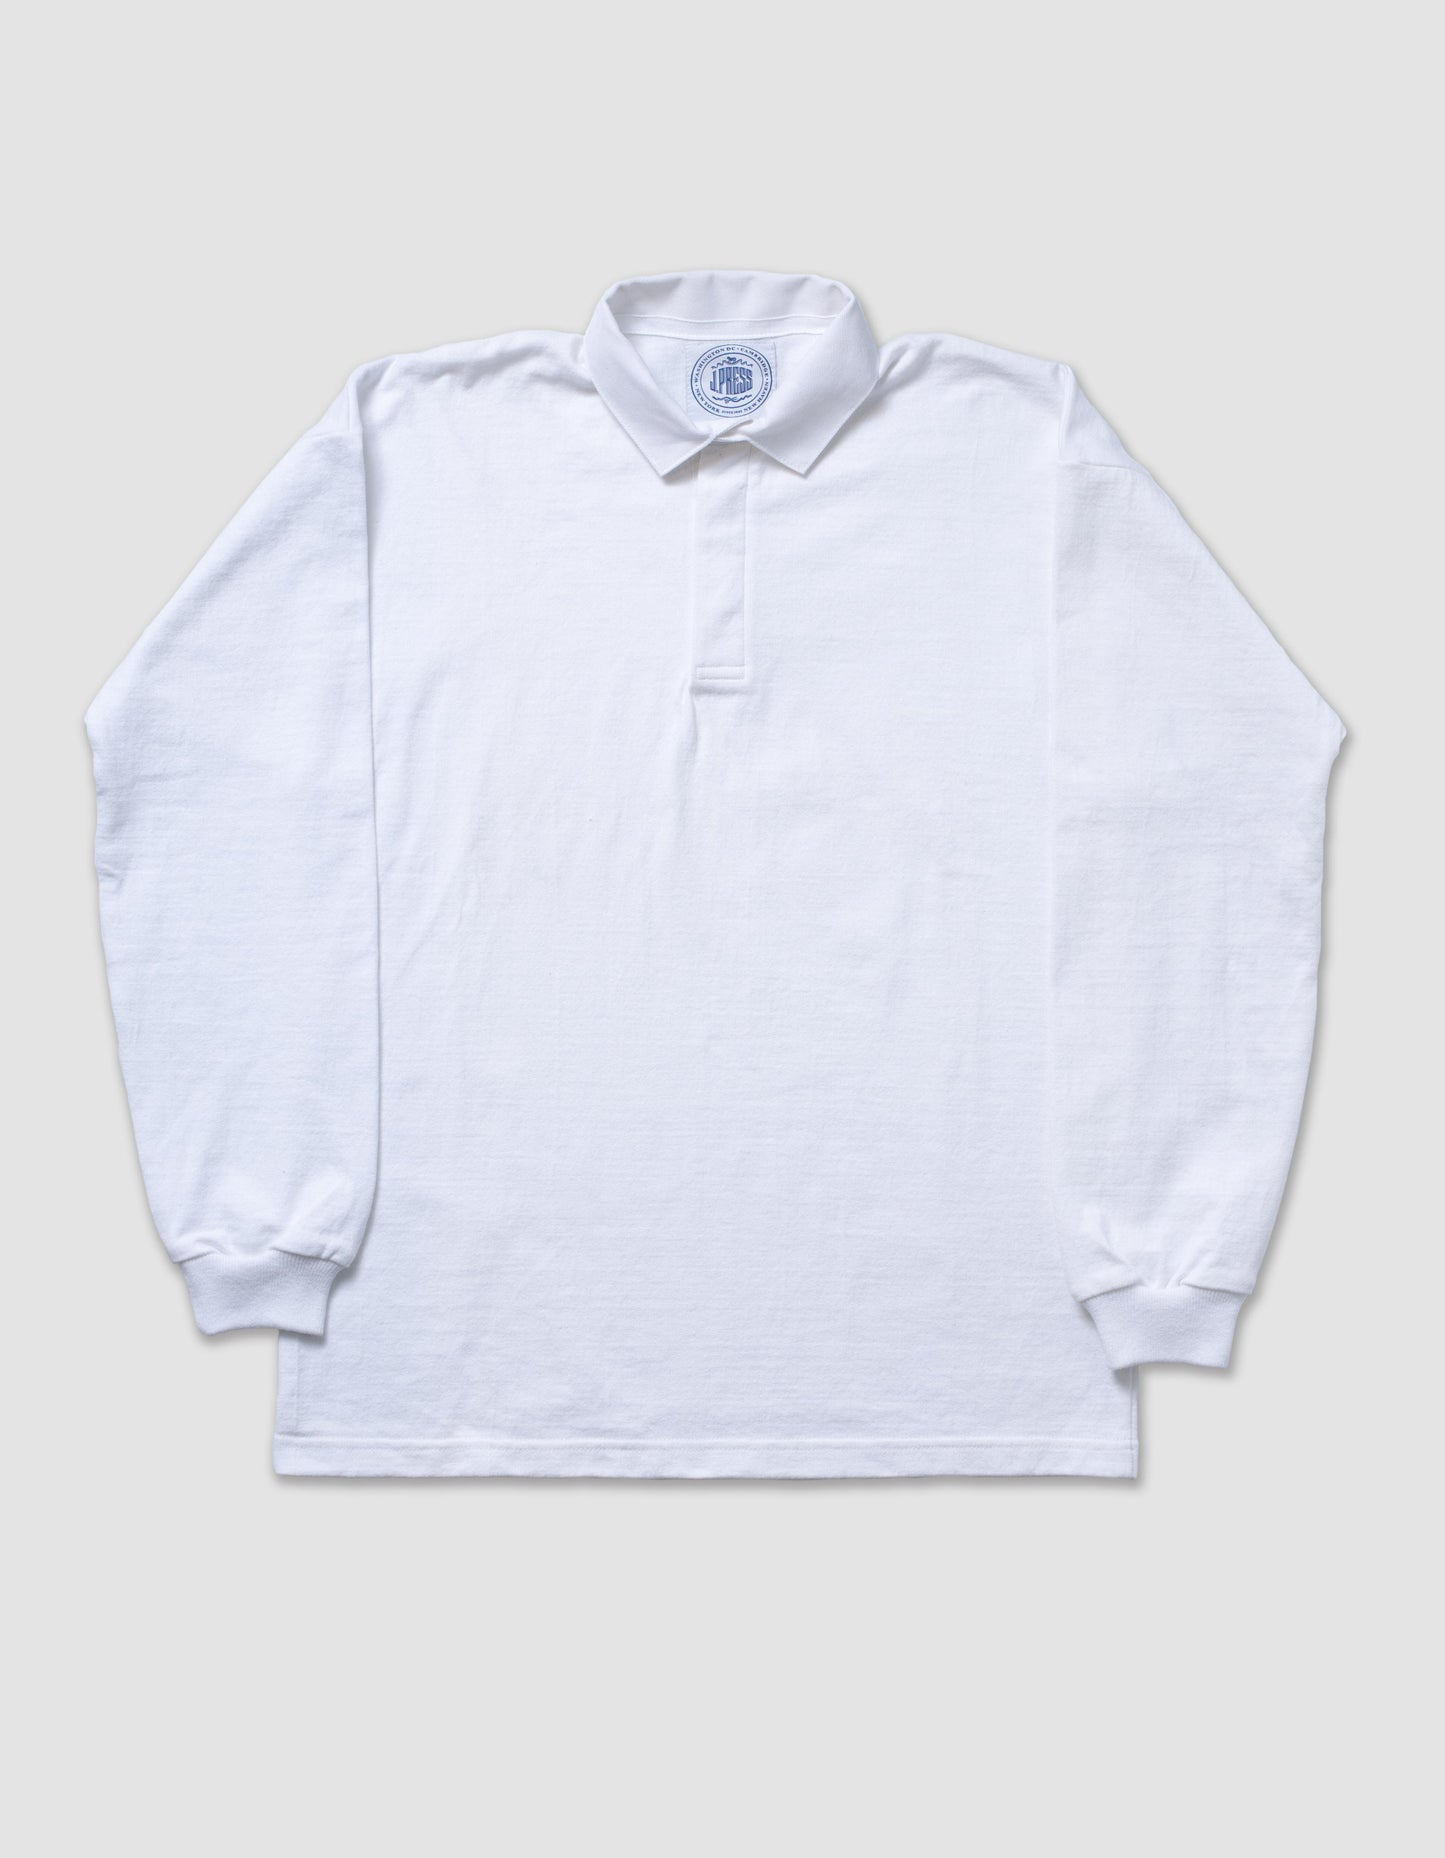 SOLID RUGBY SHIRT - WHITE